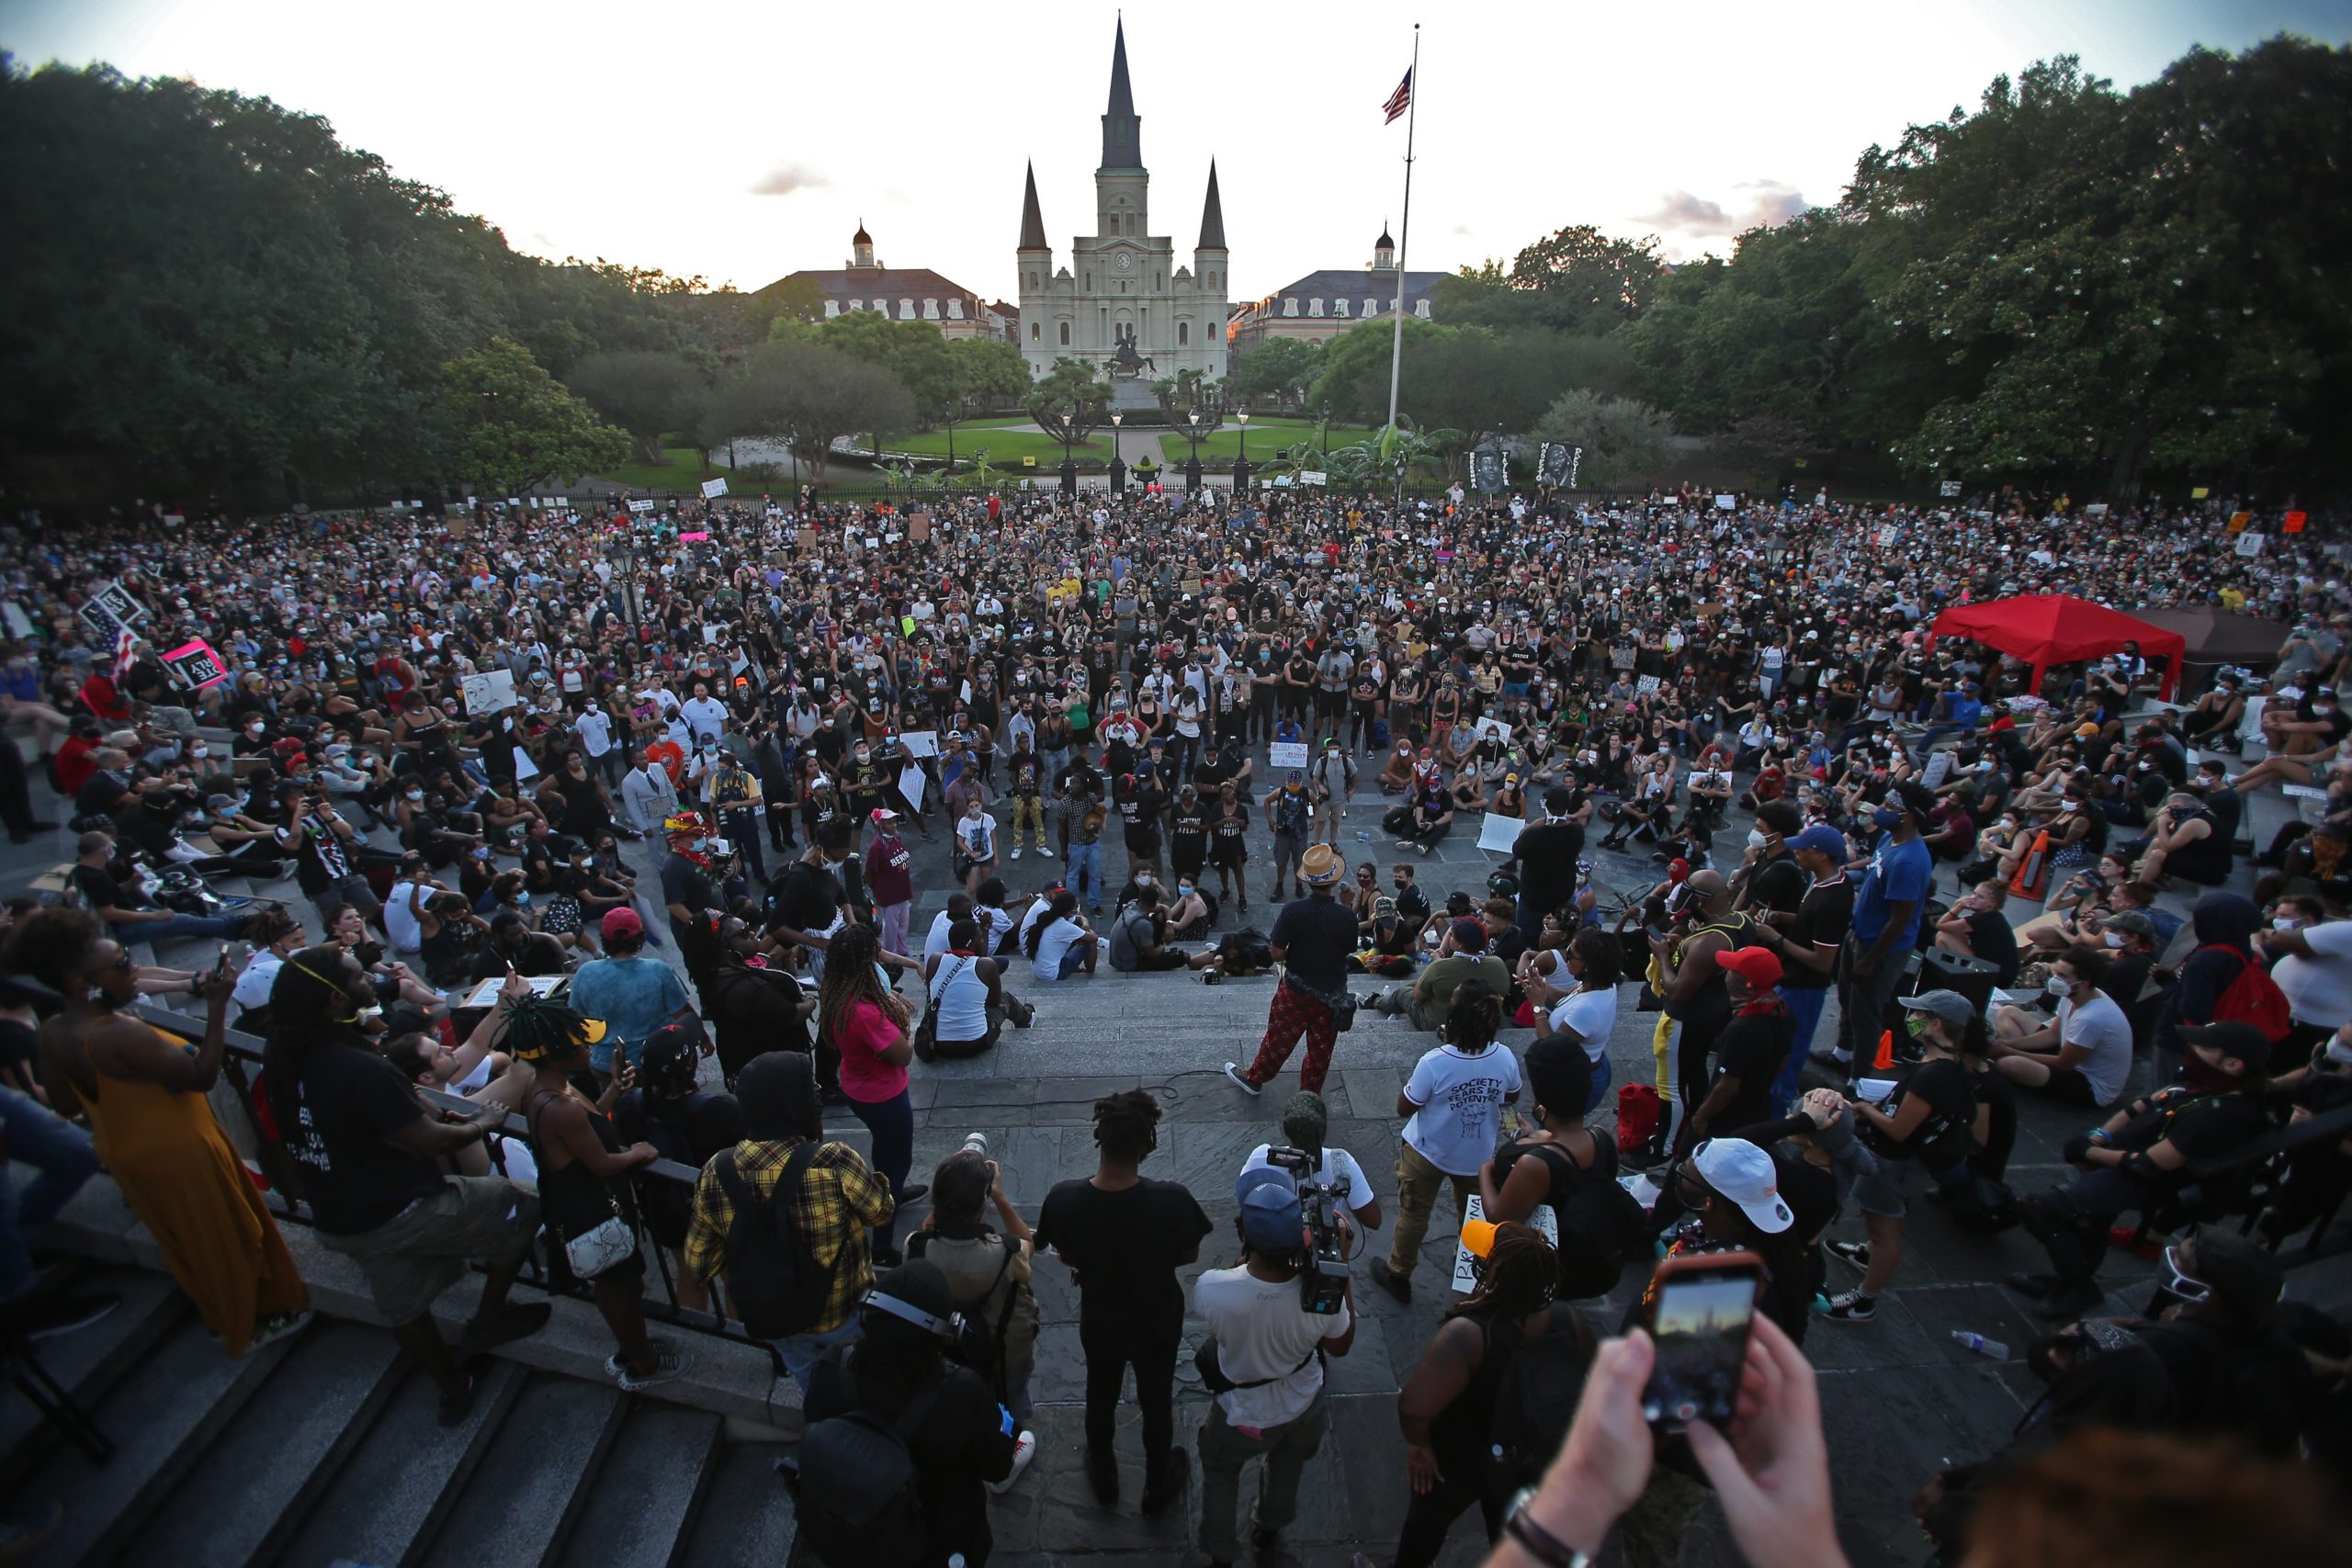 Thousands of people gather on Decatur Street in front of Jackson Square for a rally to protest the killing by police of George Floyd and others. Photographed on Friday, June 5, 2020. (Photo by Michael DeMocker)